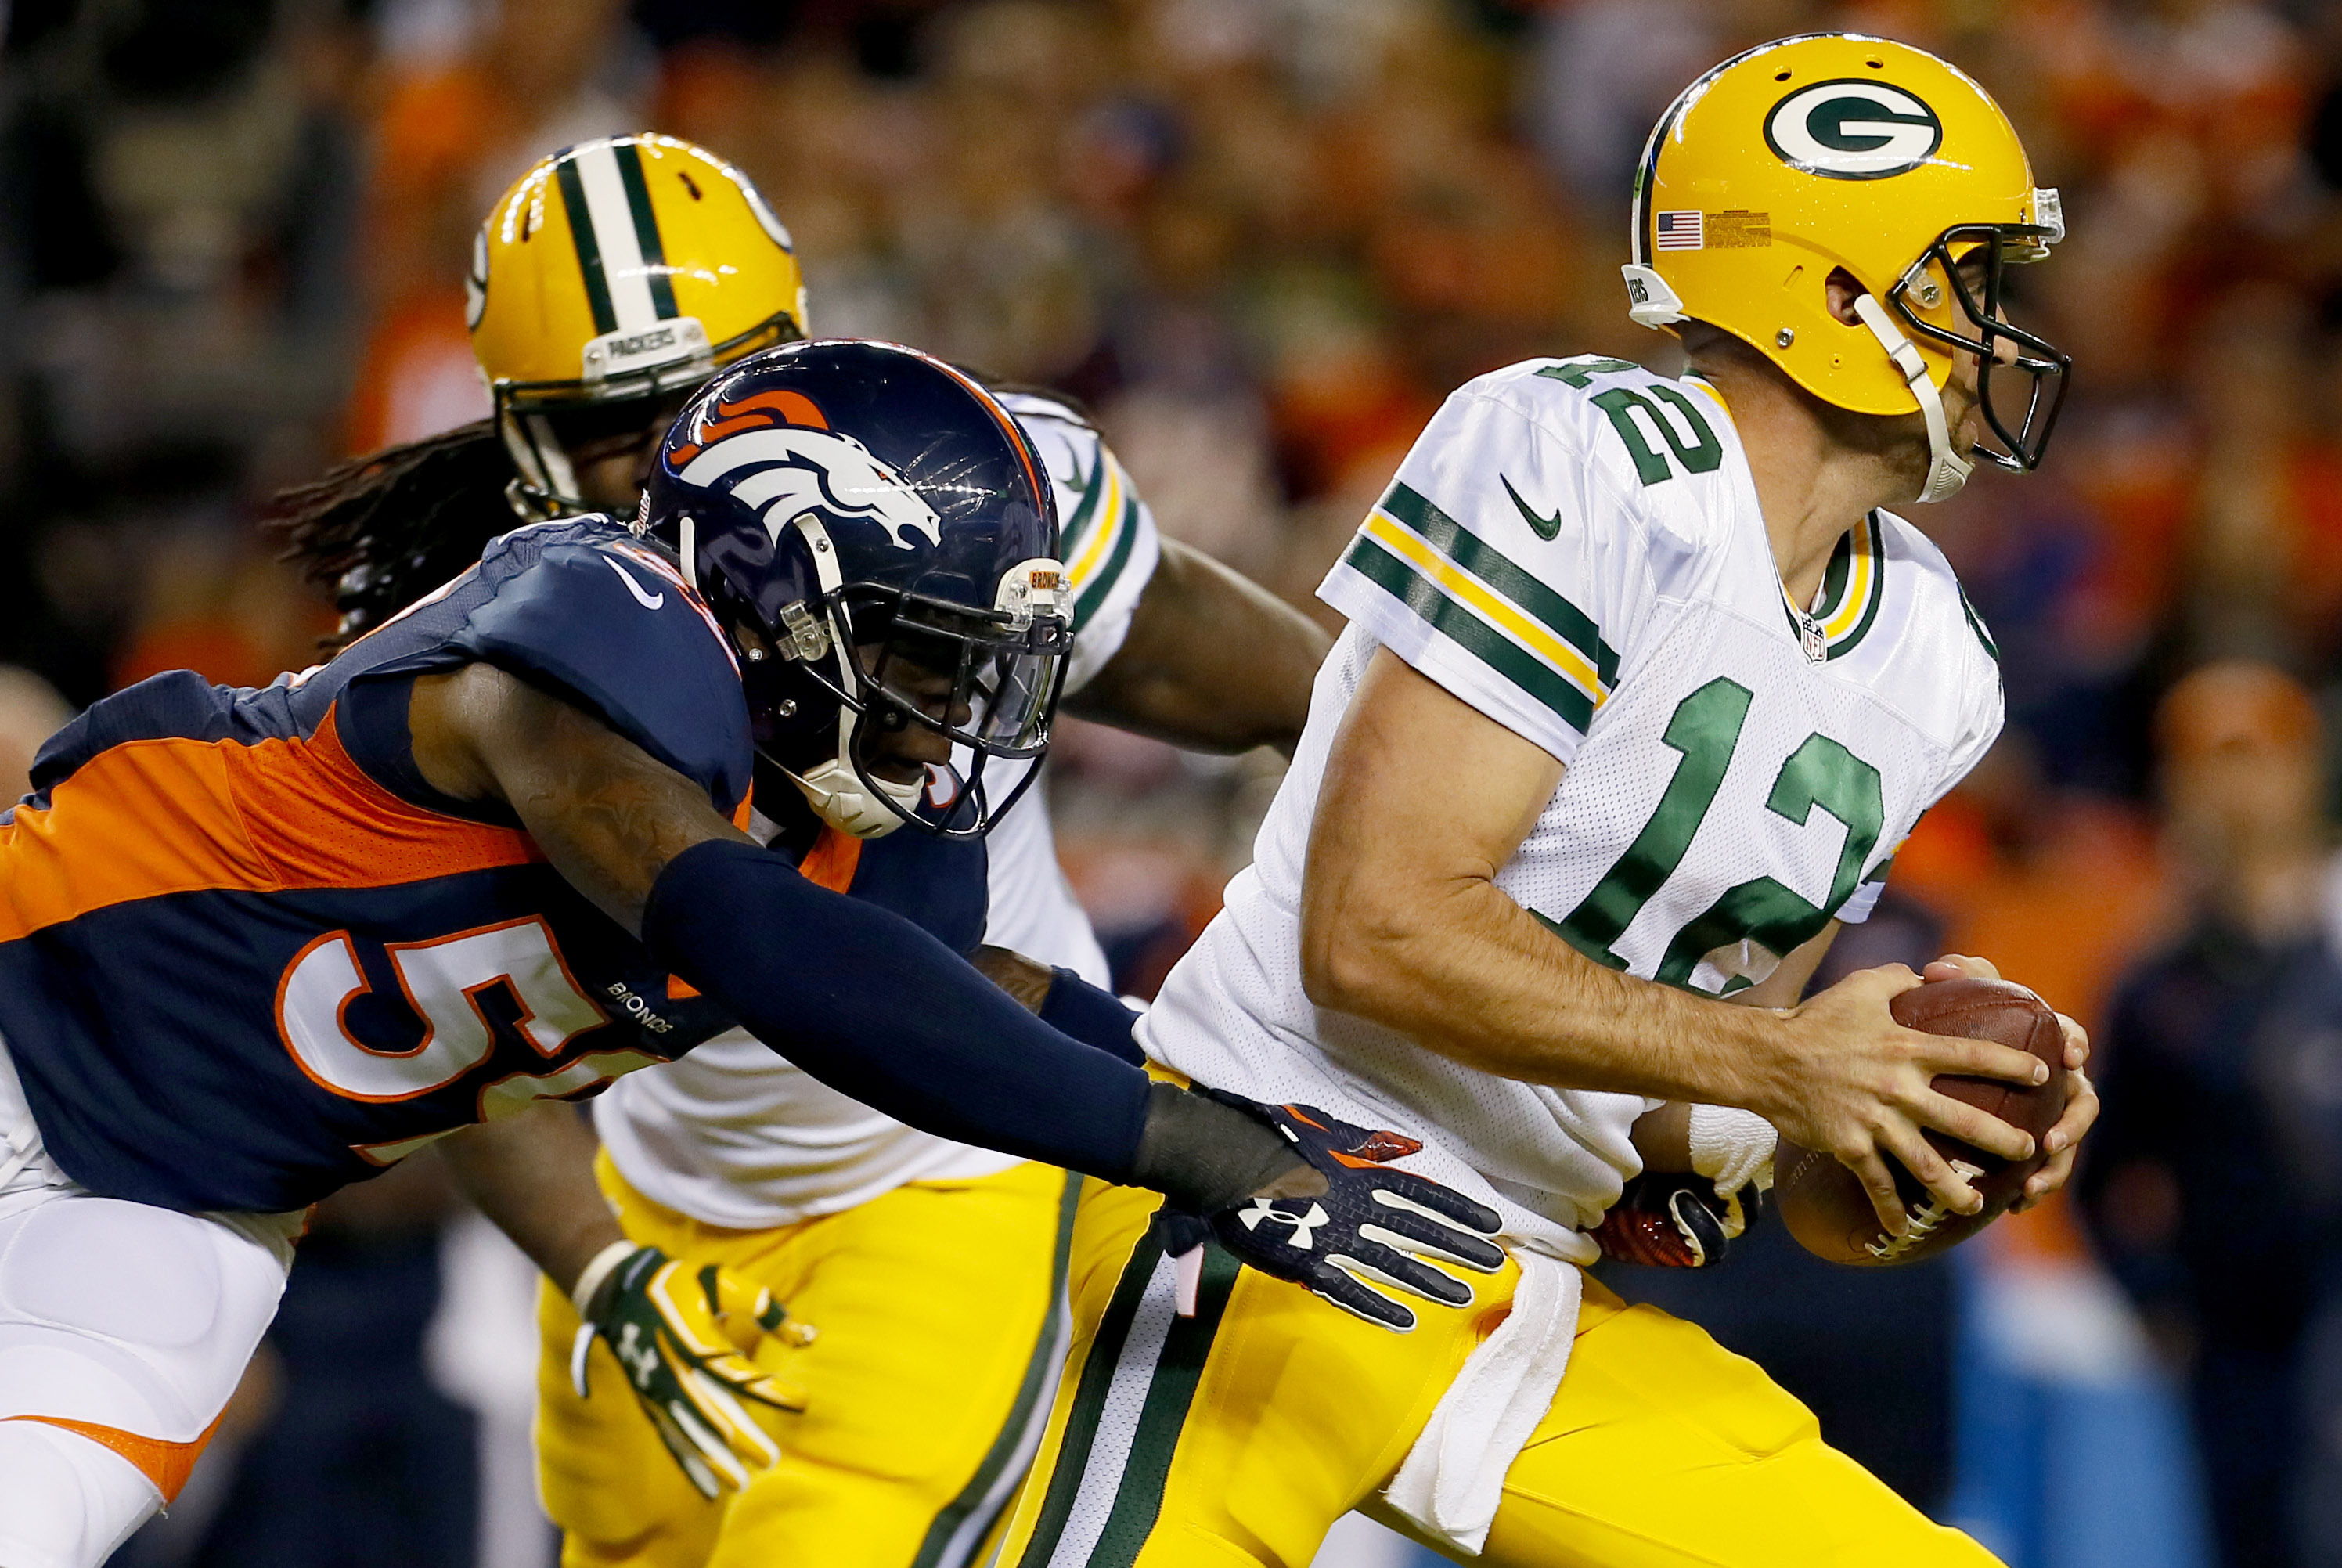 Green Bay Packers vs. Denver Broncos Live Score, Highlights and